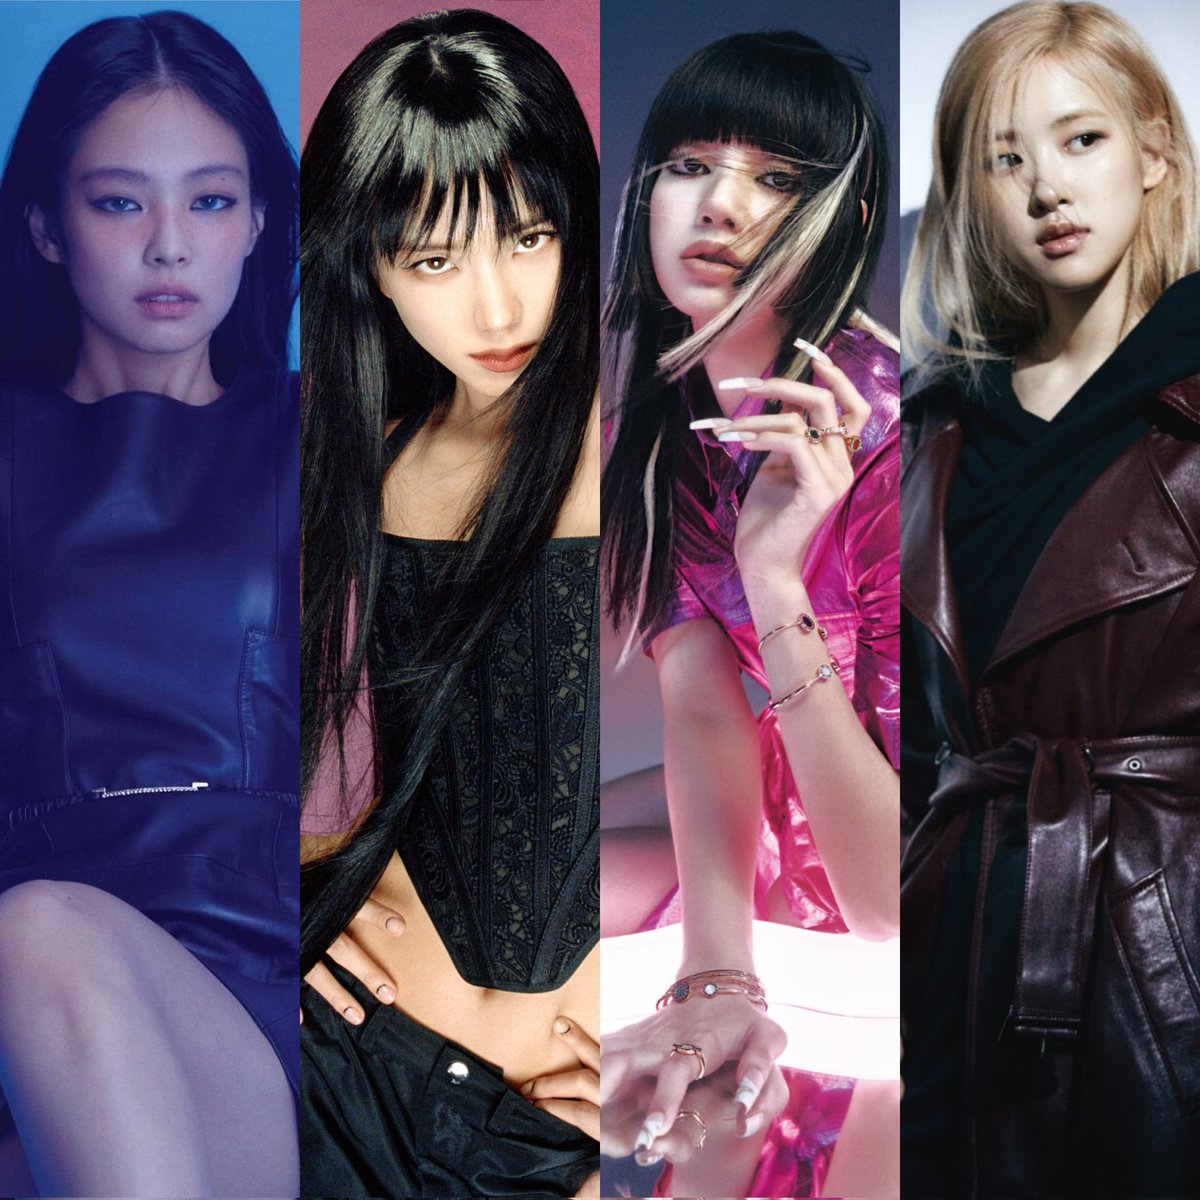 BLACKPINK remains as the fastest girl group to achieve a perfect all kill or PAK:

#1 BLACKPINK - 6 days
#2 ILLIT - 28 days
#3 NewJeans - 146 days
#4 ioi - 168 days
#5 Twice - 190 days
#6 IVE - 285 days
#7 aespa - 332 days